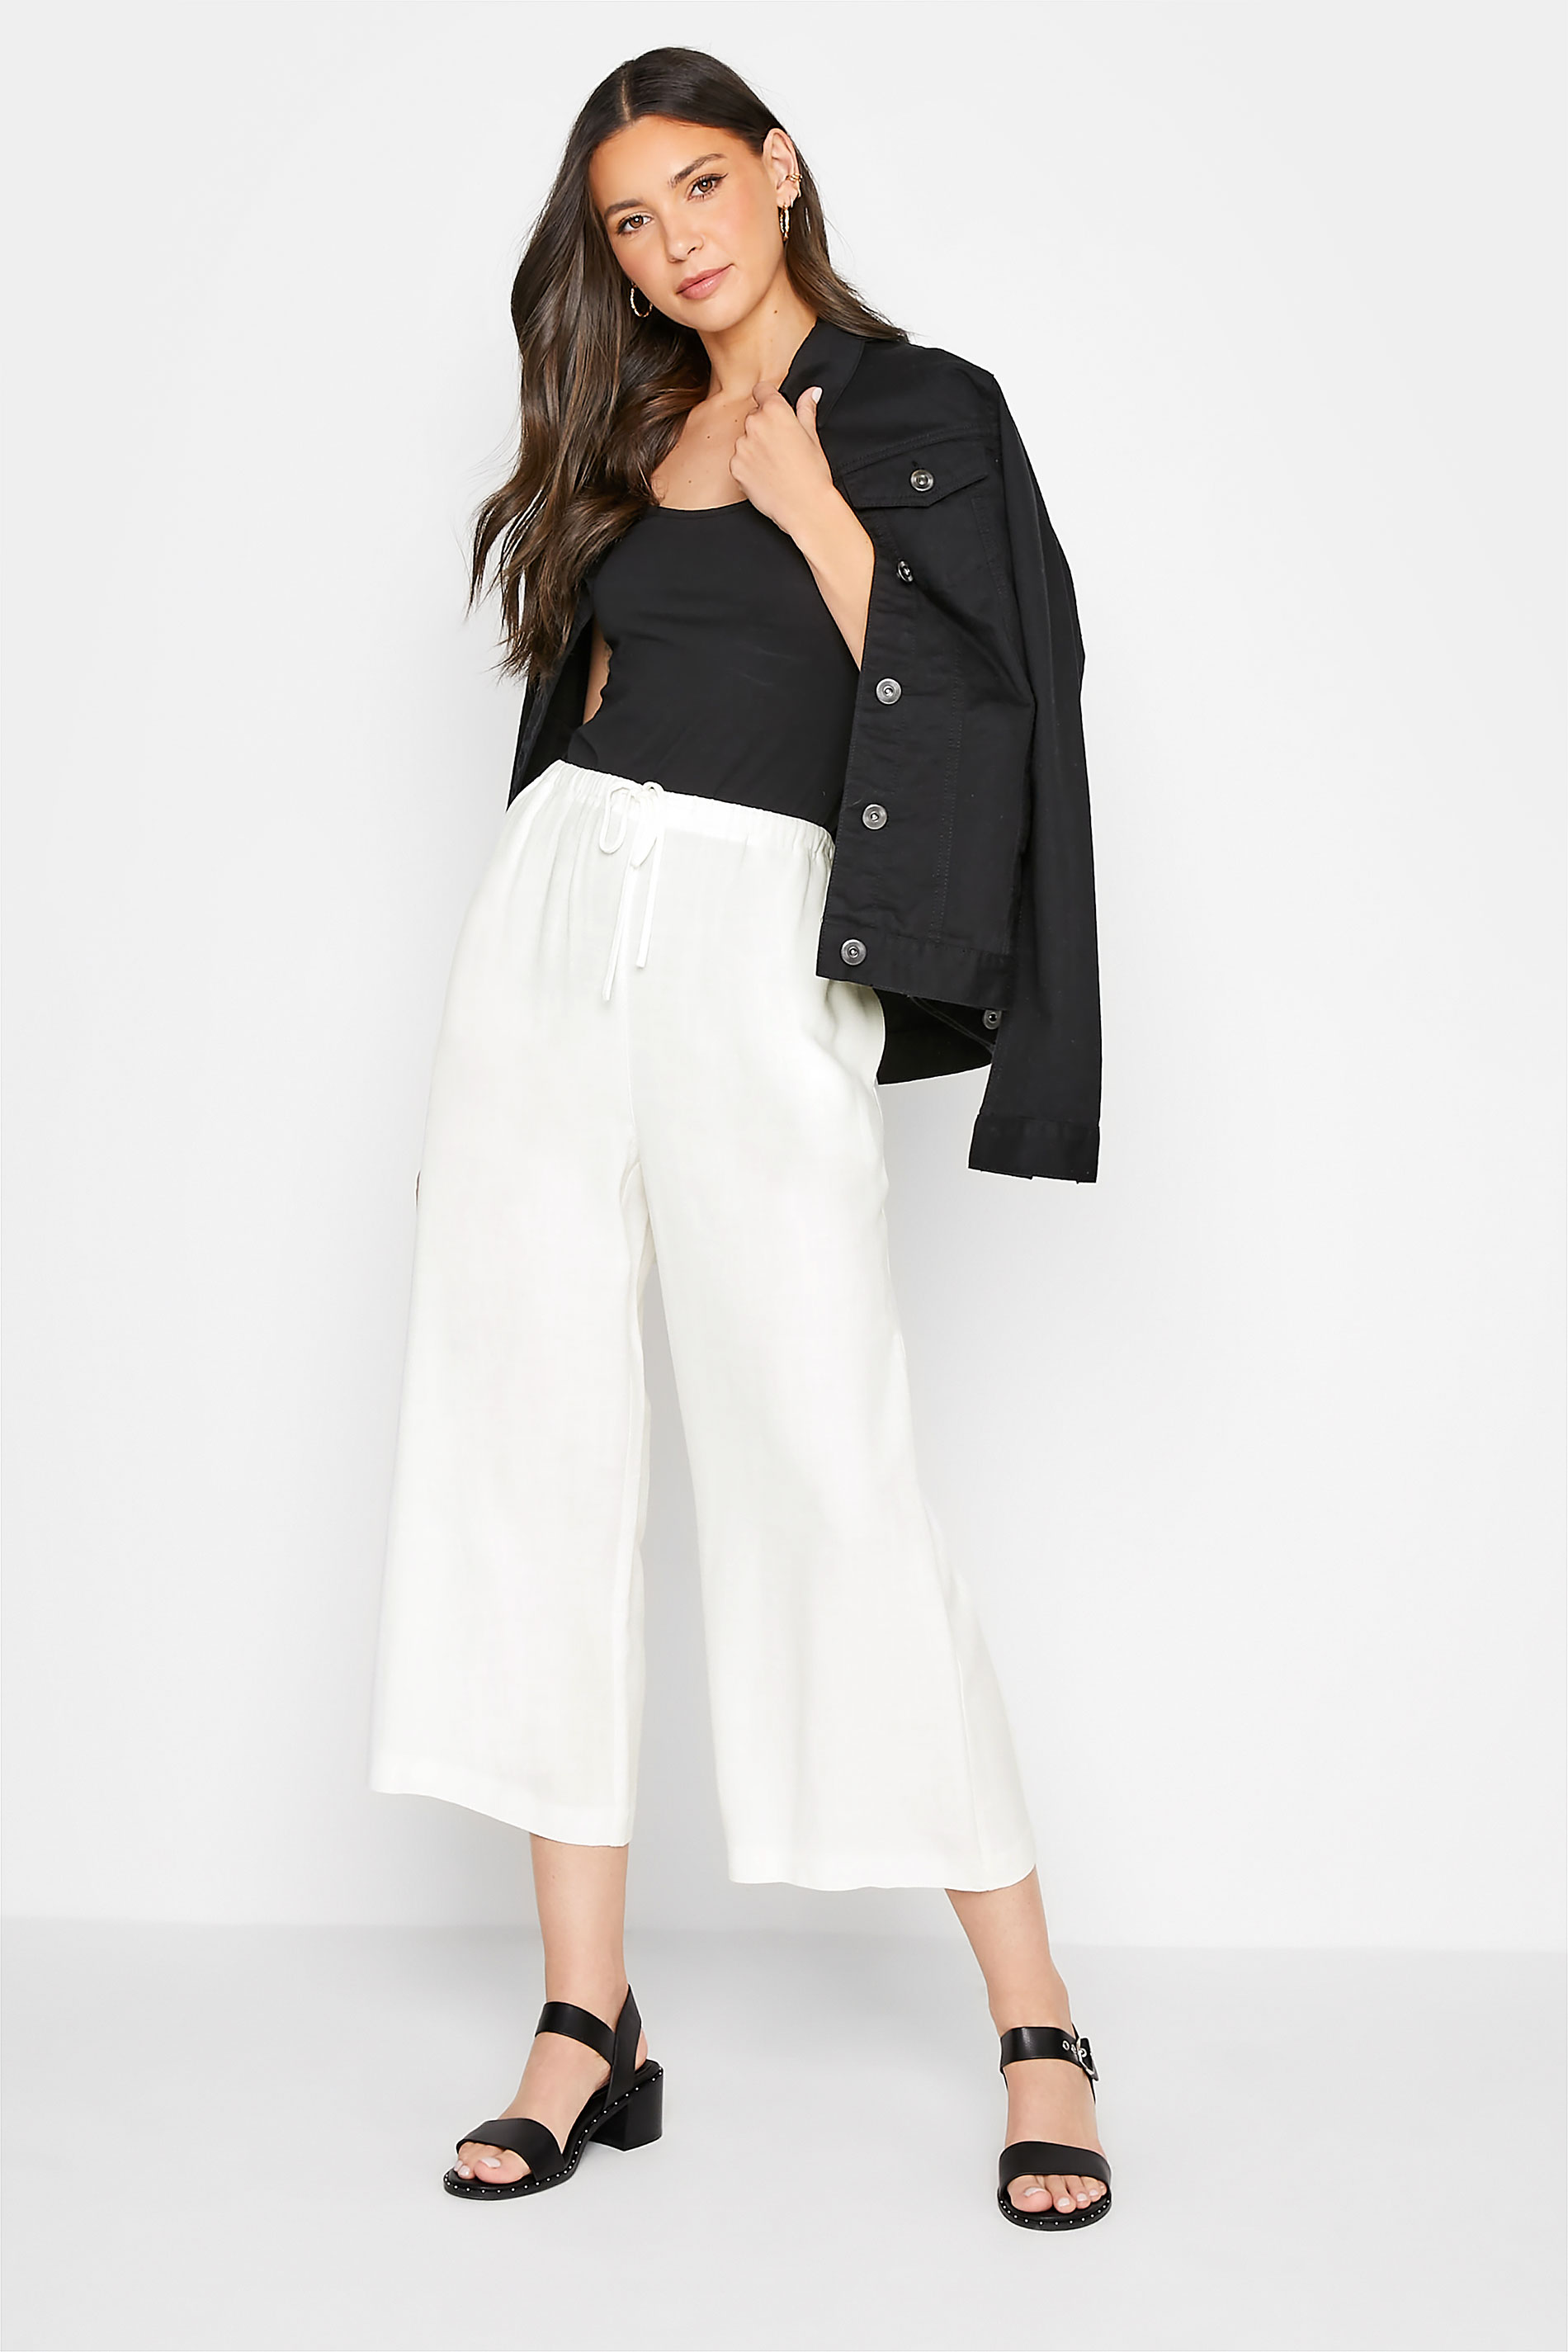 LTS Tall Women's White Linen Blend Cropped Trousers | Long Tall Sally  2